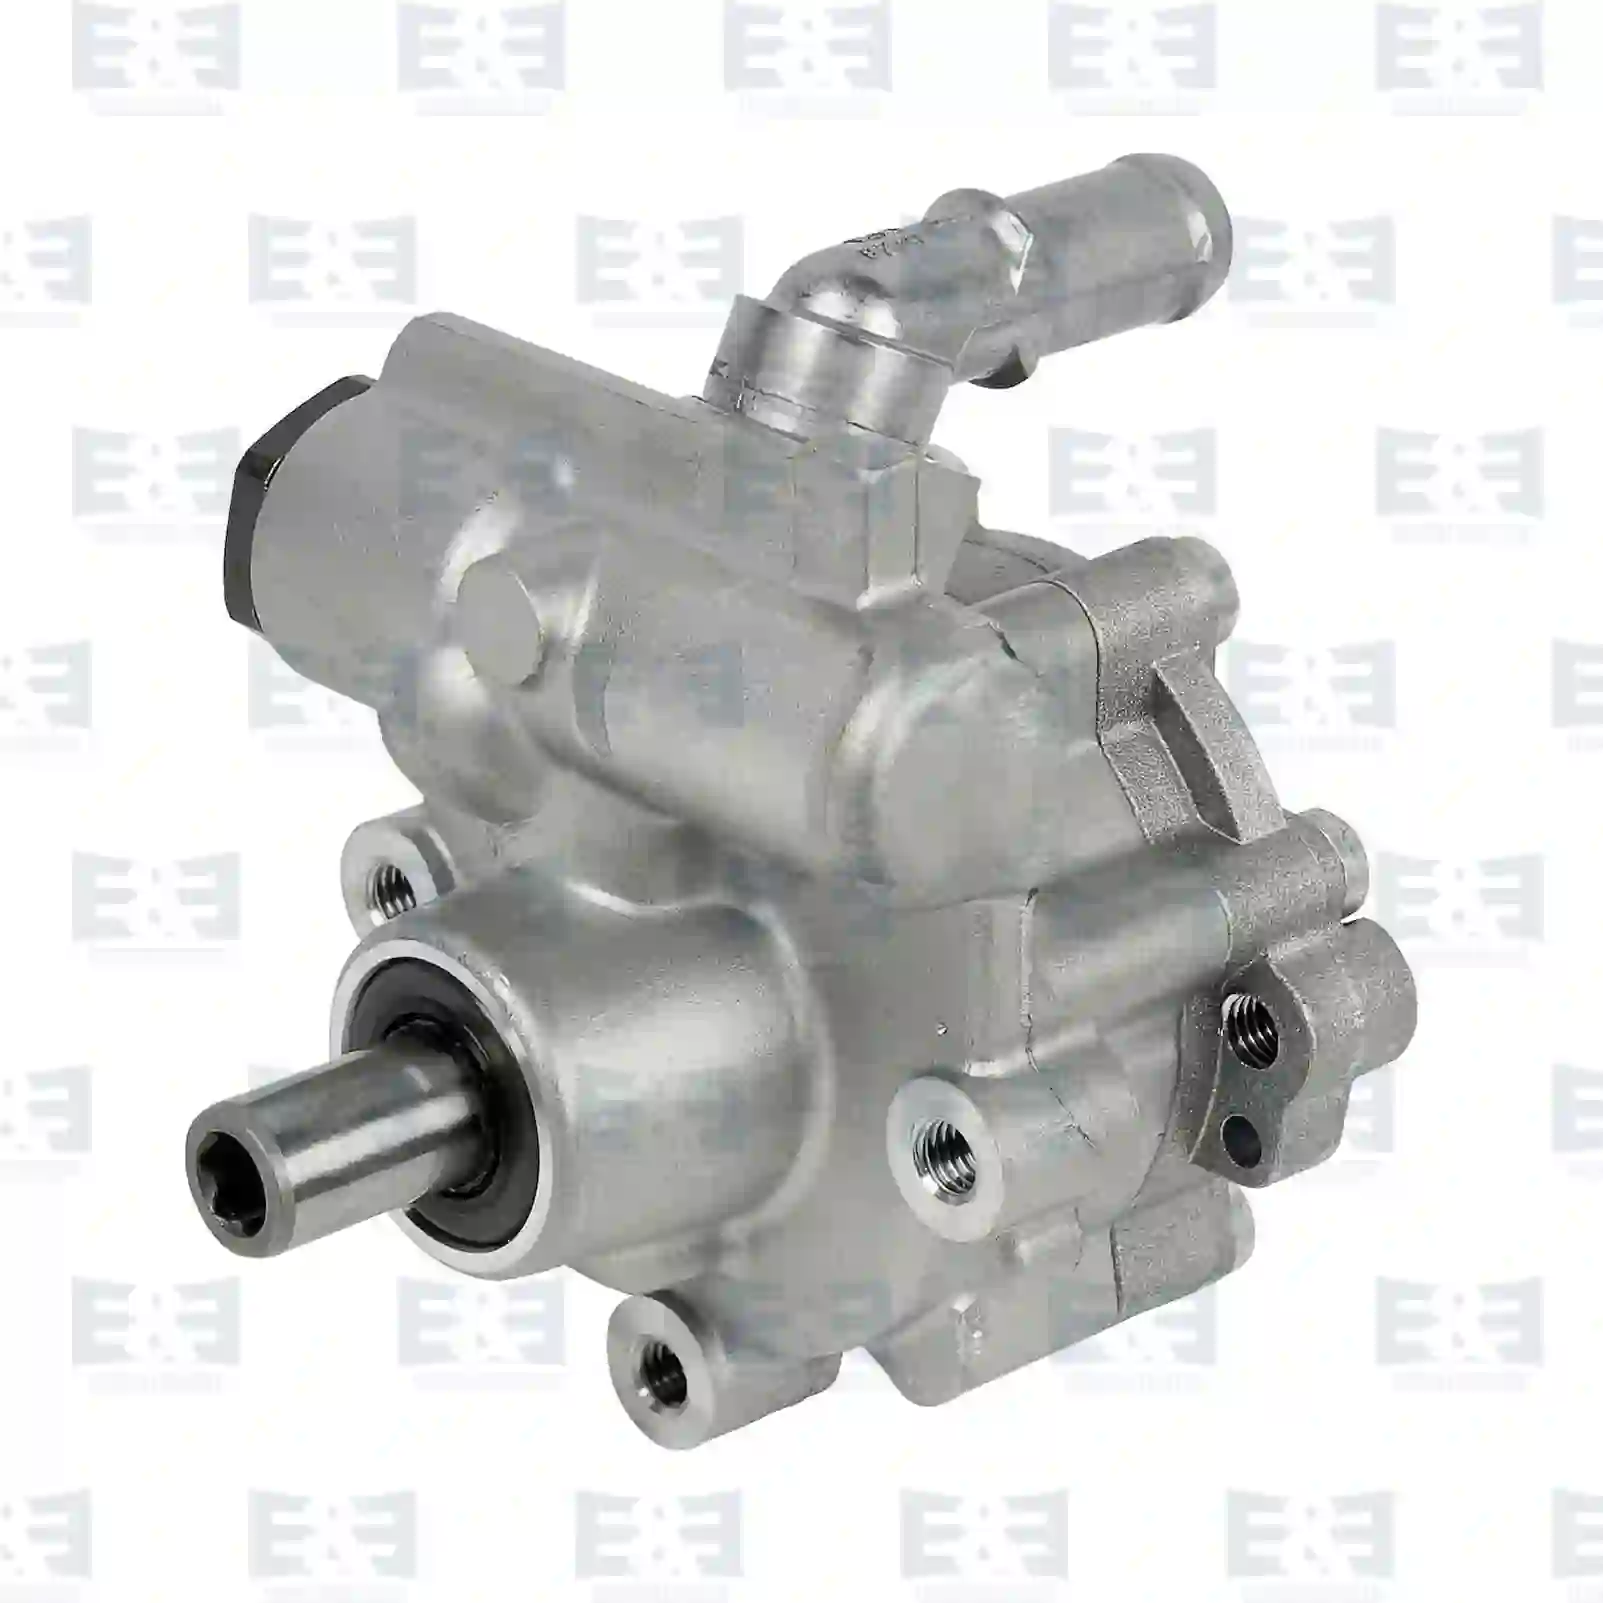 Servo pump, 2E2205773, 9110668, 91166807, 9116807, 9121312, 93175602, 93859899, 93861732, 49110-00Q0D, 49110-00Q1A, 49110-00Q1E, 49110-00Q2L, 49110-00QAG, 49110-0246R, 49110-1050R, 4402668, 4405479, 4408206, 4414166, 4418160, 4418898, 5948064, 491100246R, 491104453R, 491104521R, 7485132762, 8200024738, 8200024778, 8200712890, 8200838037, 8201170707, 8300024778 ||  2E2205773 E&E Truck Spare Parts | Truck Spare Parts, Auotomotive Spare Parts Servo pump, 2E2205773, 9110668, 91166807, 9116807, 9121312, 93175602, 93859899, 93861732, 49110-00Q0D, 49110-00Q1A, 49110-00Q1E, 49110-00Q2L, 49110-00QAG, 49110-0246R, 49110-1050R, 4402668, 4405479, 4408206, 4414166, 4418160, 4418898, 5948064, 491100246R, 491104453R, 491104521R, 7485132762, 8200024738, 8200024778, 8200712890, 8200838037, 8201170707, 8300024778 ||  2E2205773 E&E Truck Spare Parts | Truck Spare Parts, Auotomotive Spare Parts